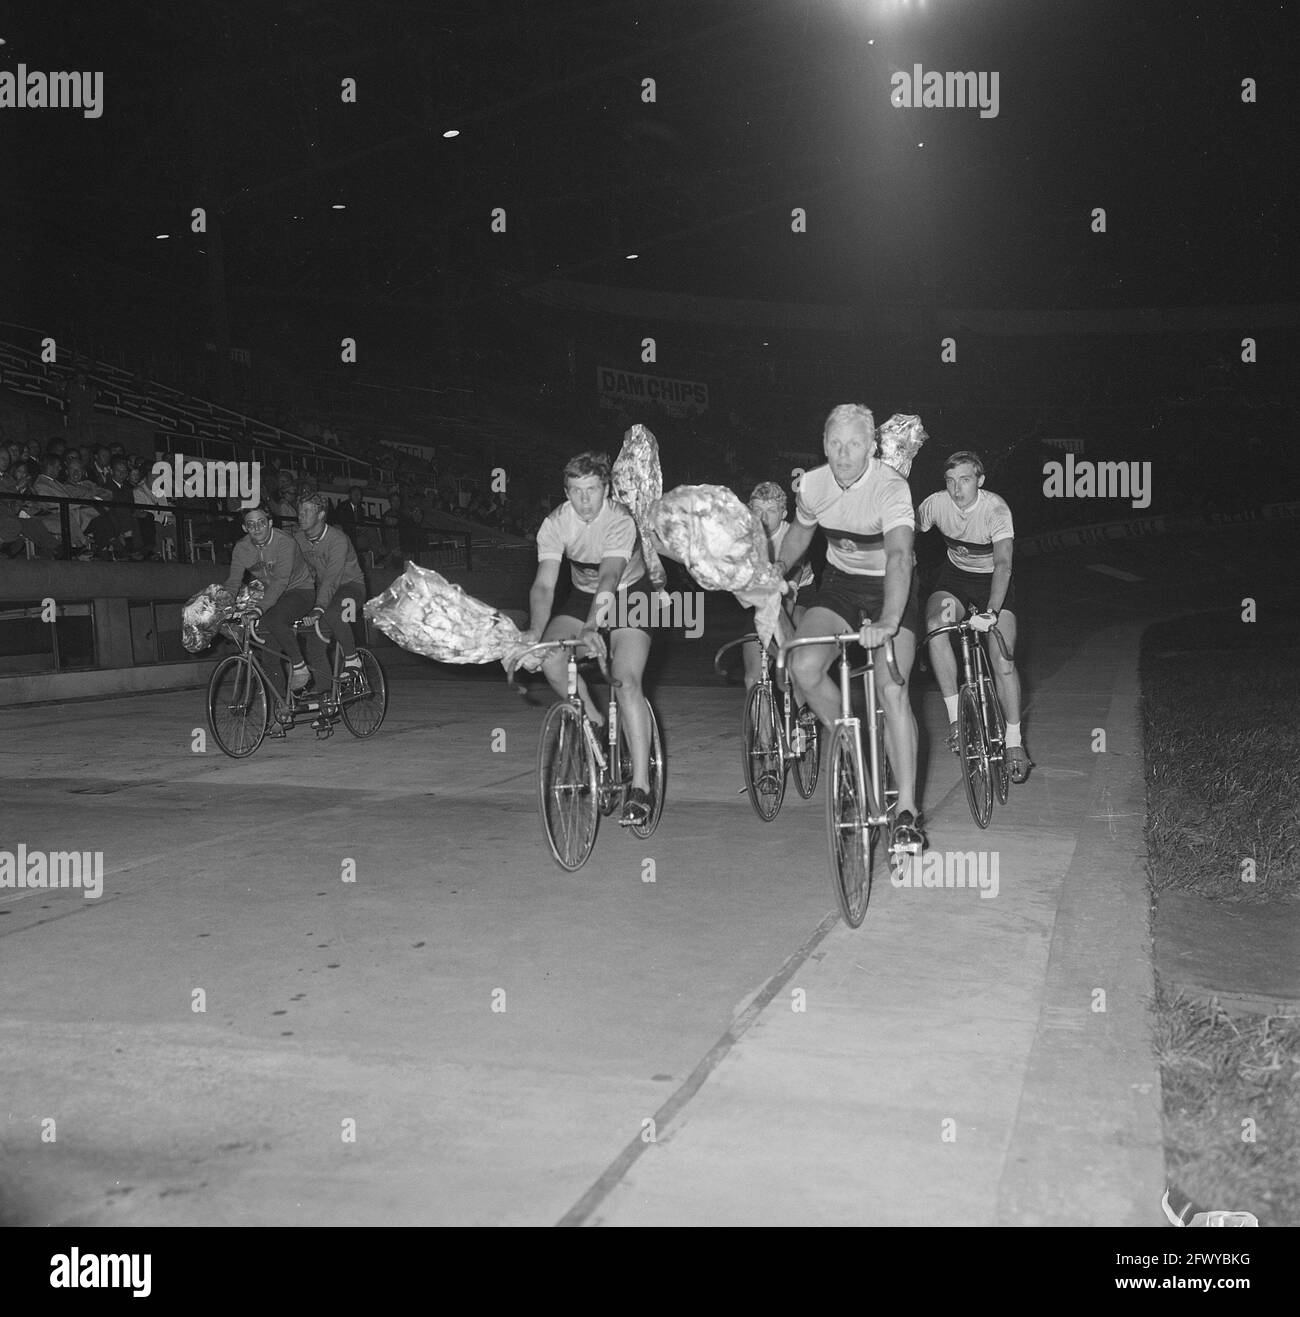 Honorary lap with flowers by a number of cyclists, June 17, 1971, track cycling, flowers, athletes, competitions, cycling, The Netherlands, 20th centu Stock Photo